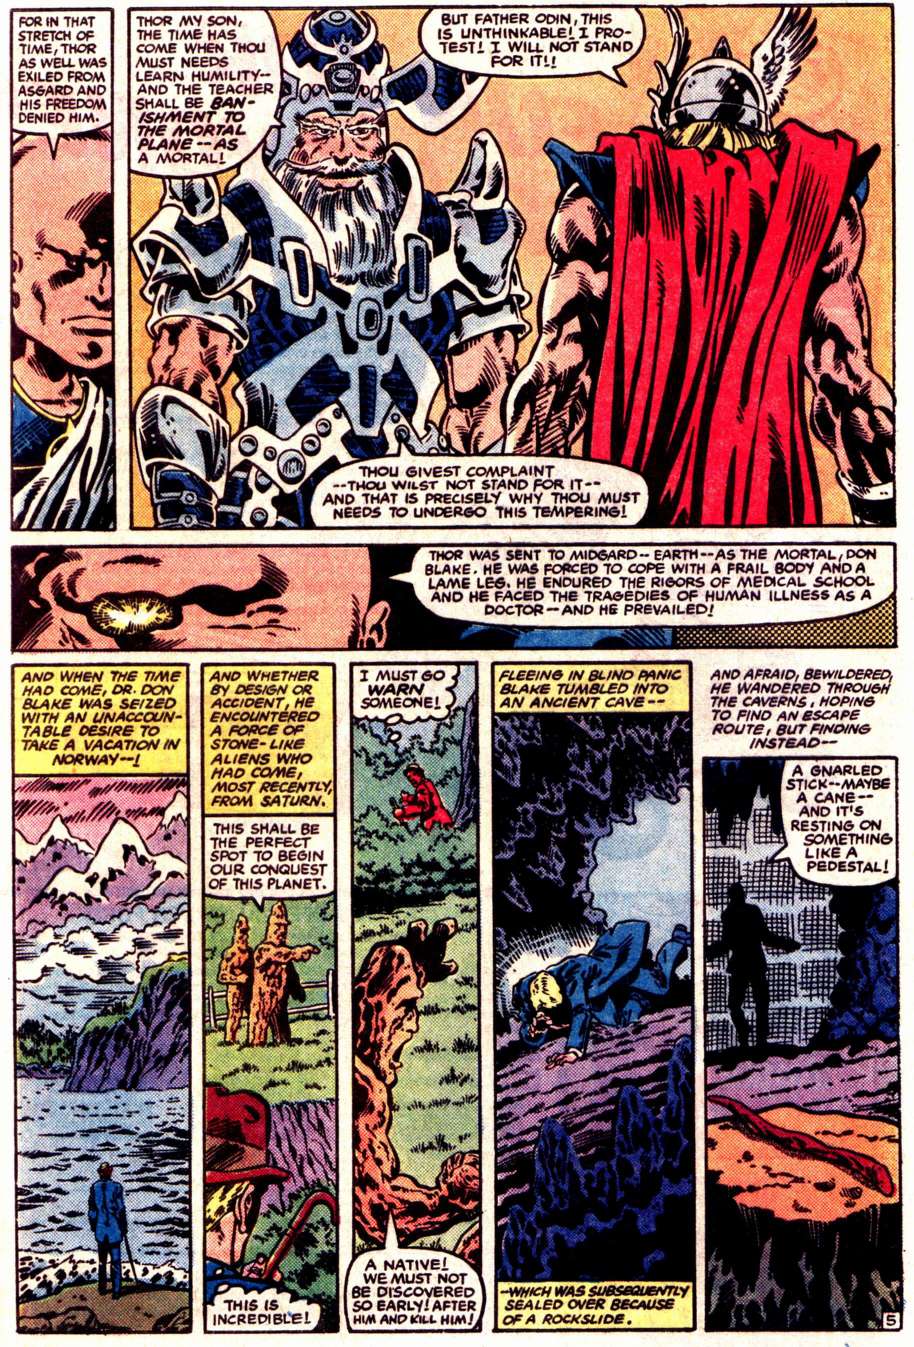 What If? (1977) issue 47 - Loki had found The hammer of Thor - Page 6